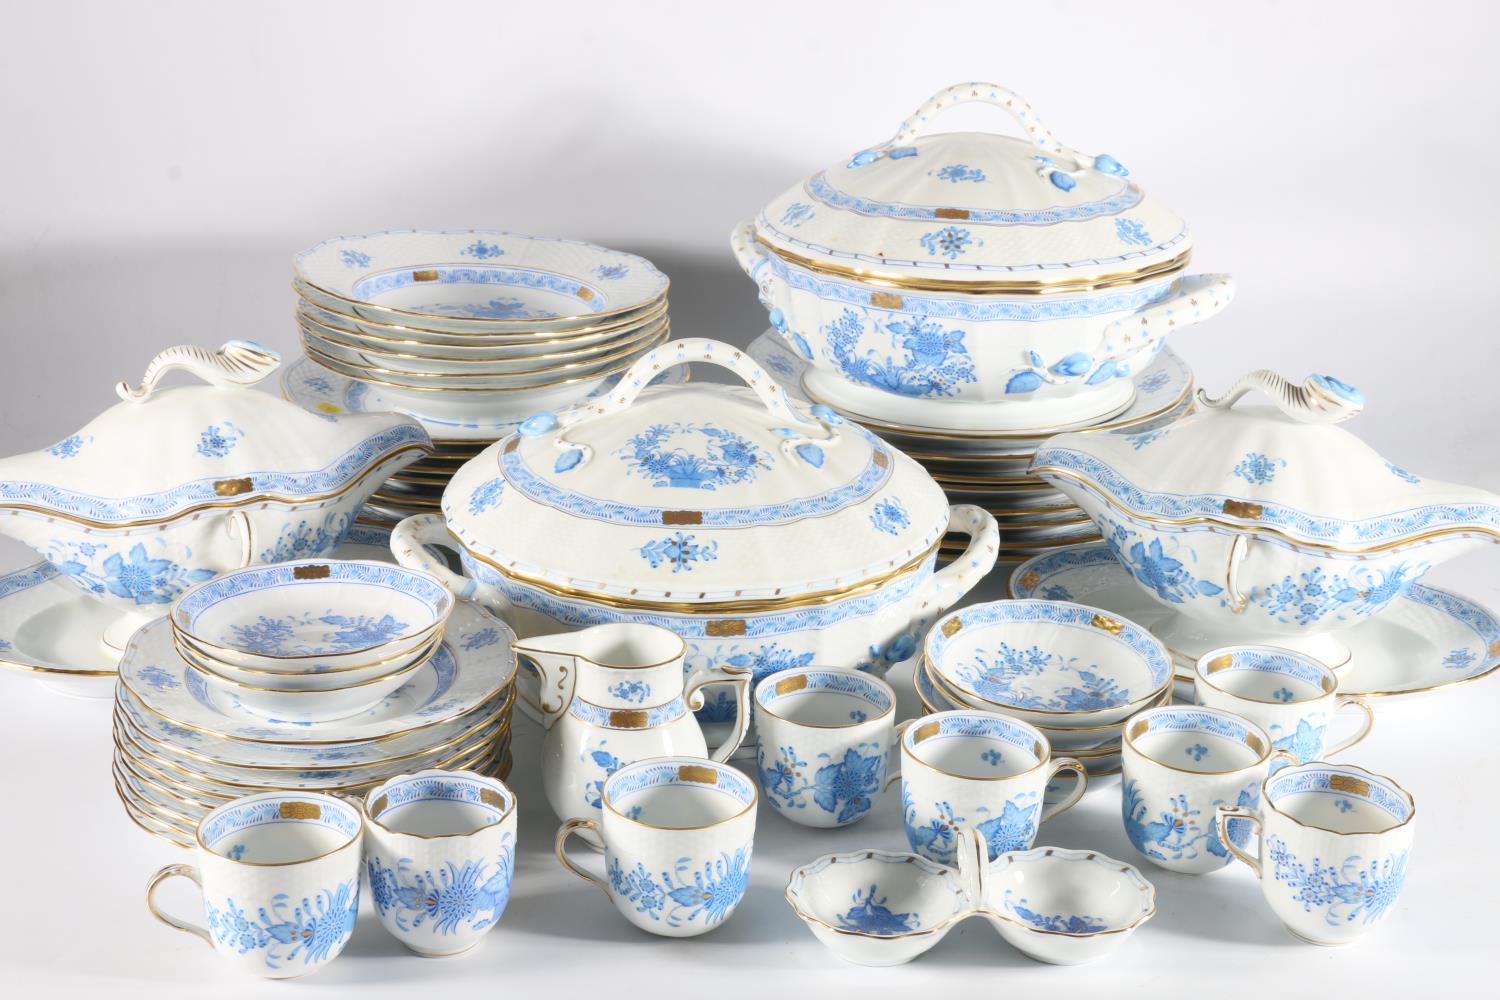 Herend of Hungary porcelain dinner and coffee service with floral and gilt pattern comprising